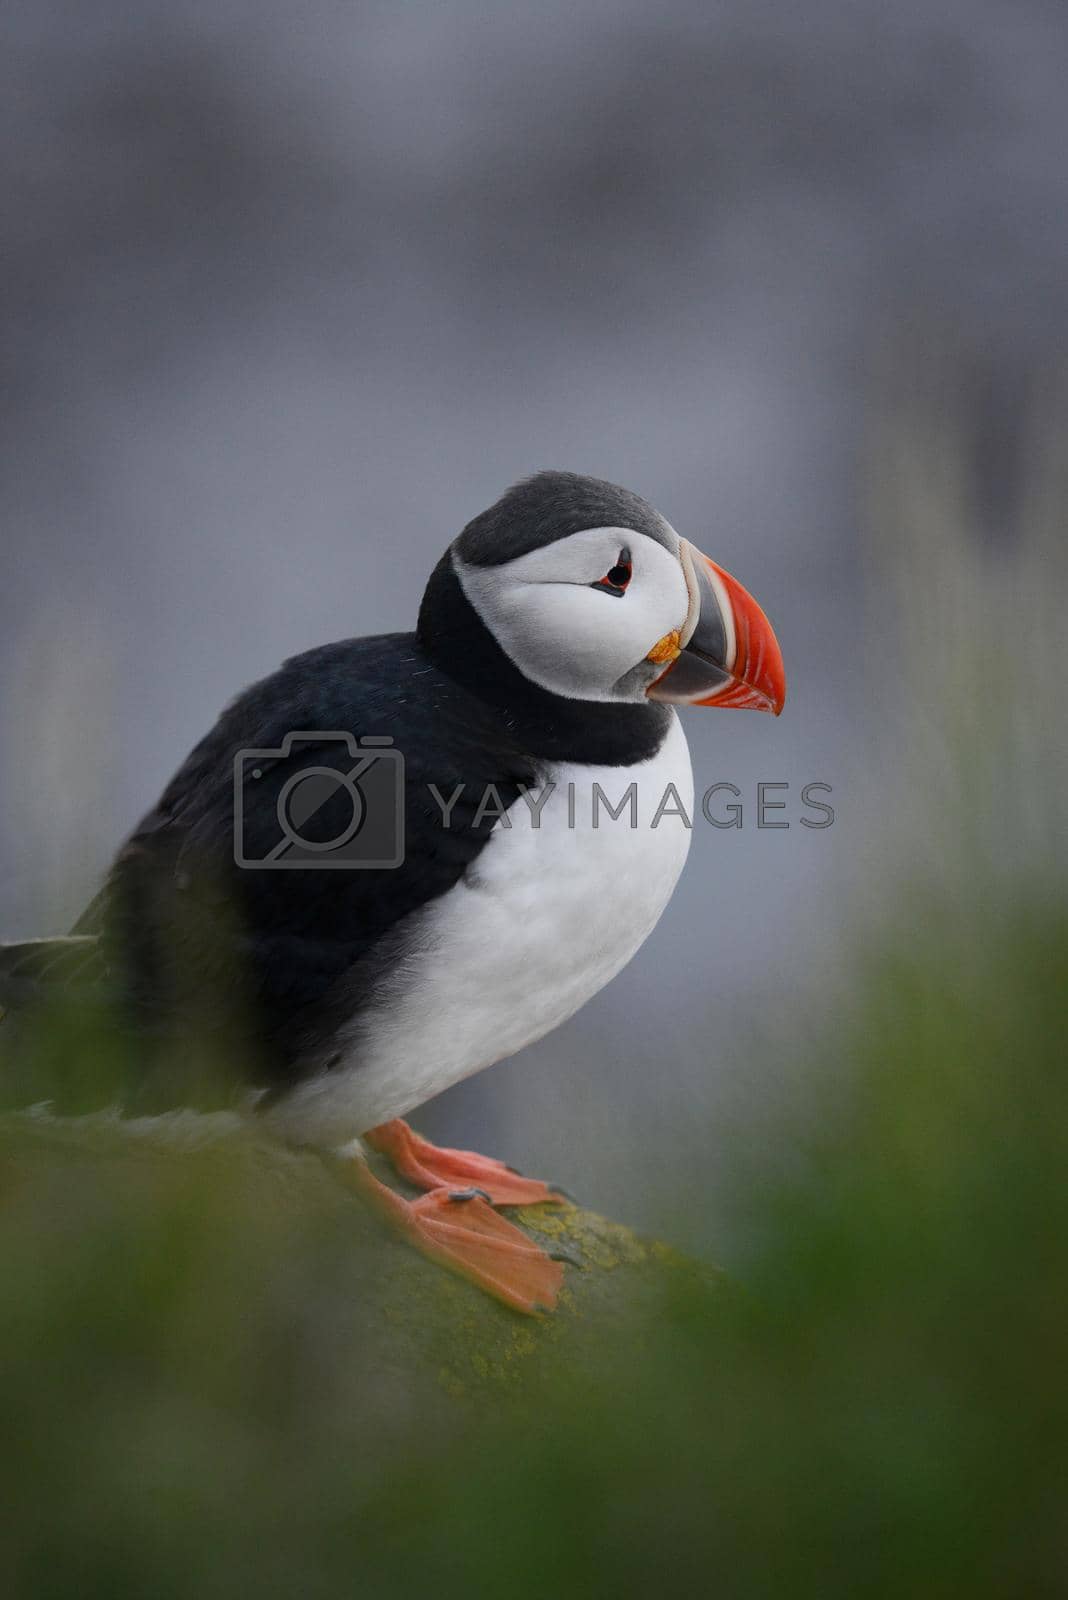 Royalty free image of Puffin from Iceland by porbital